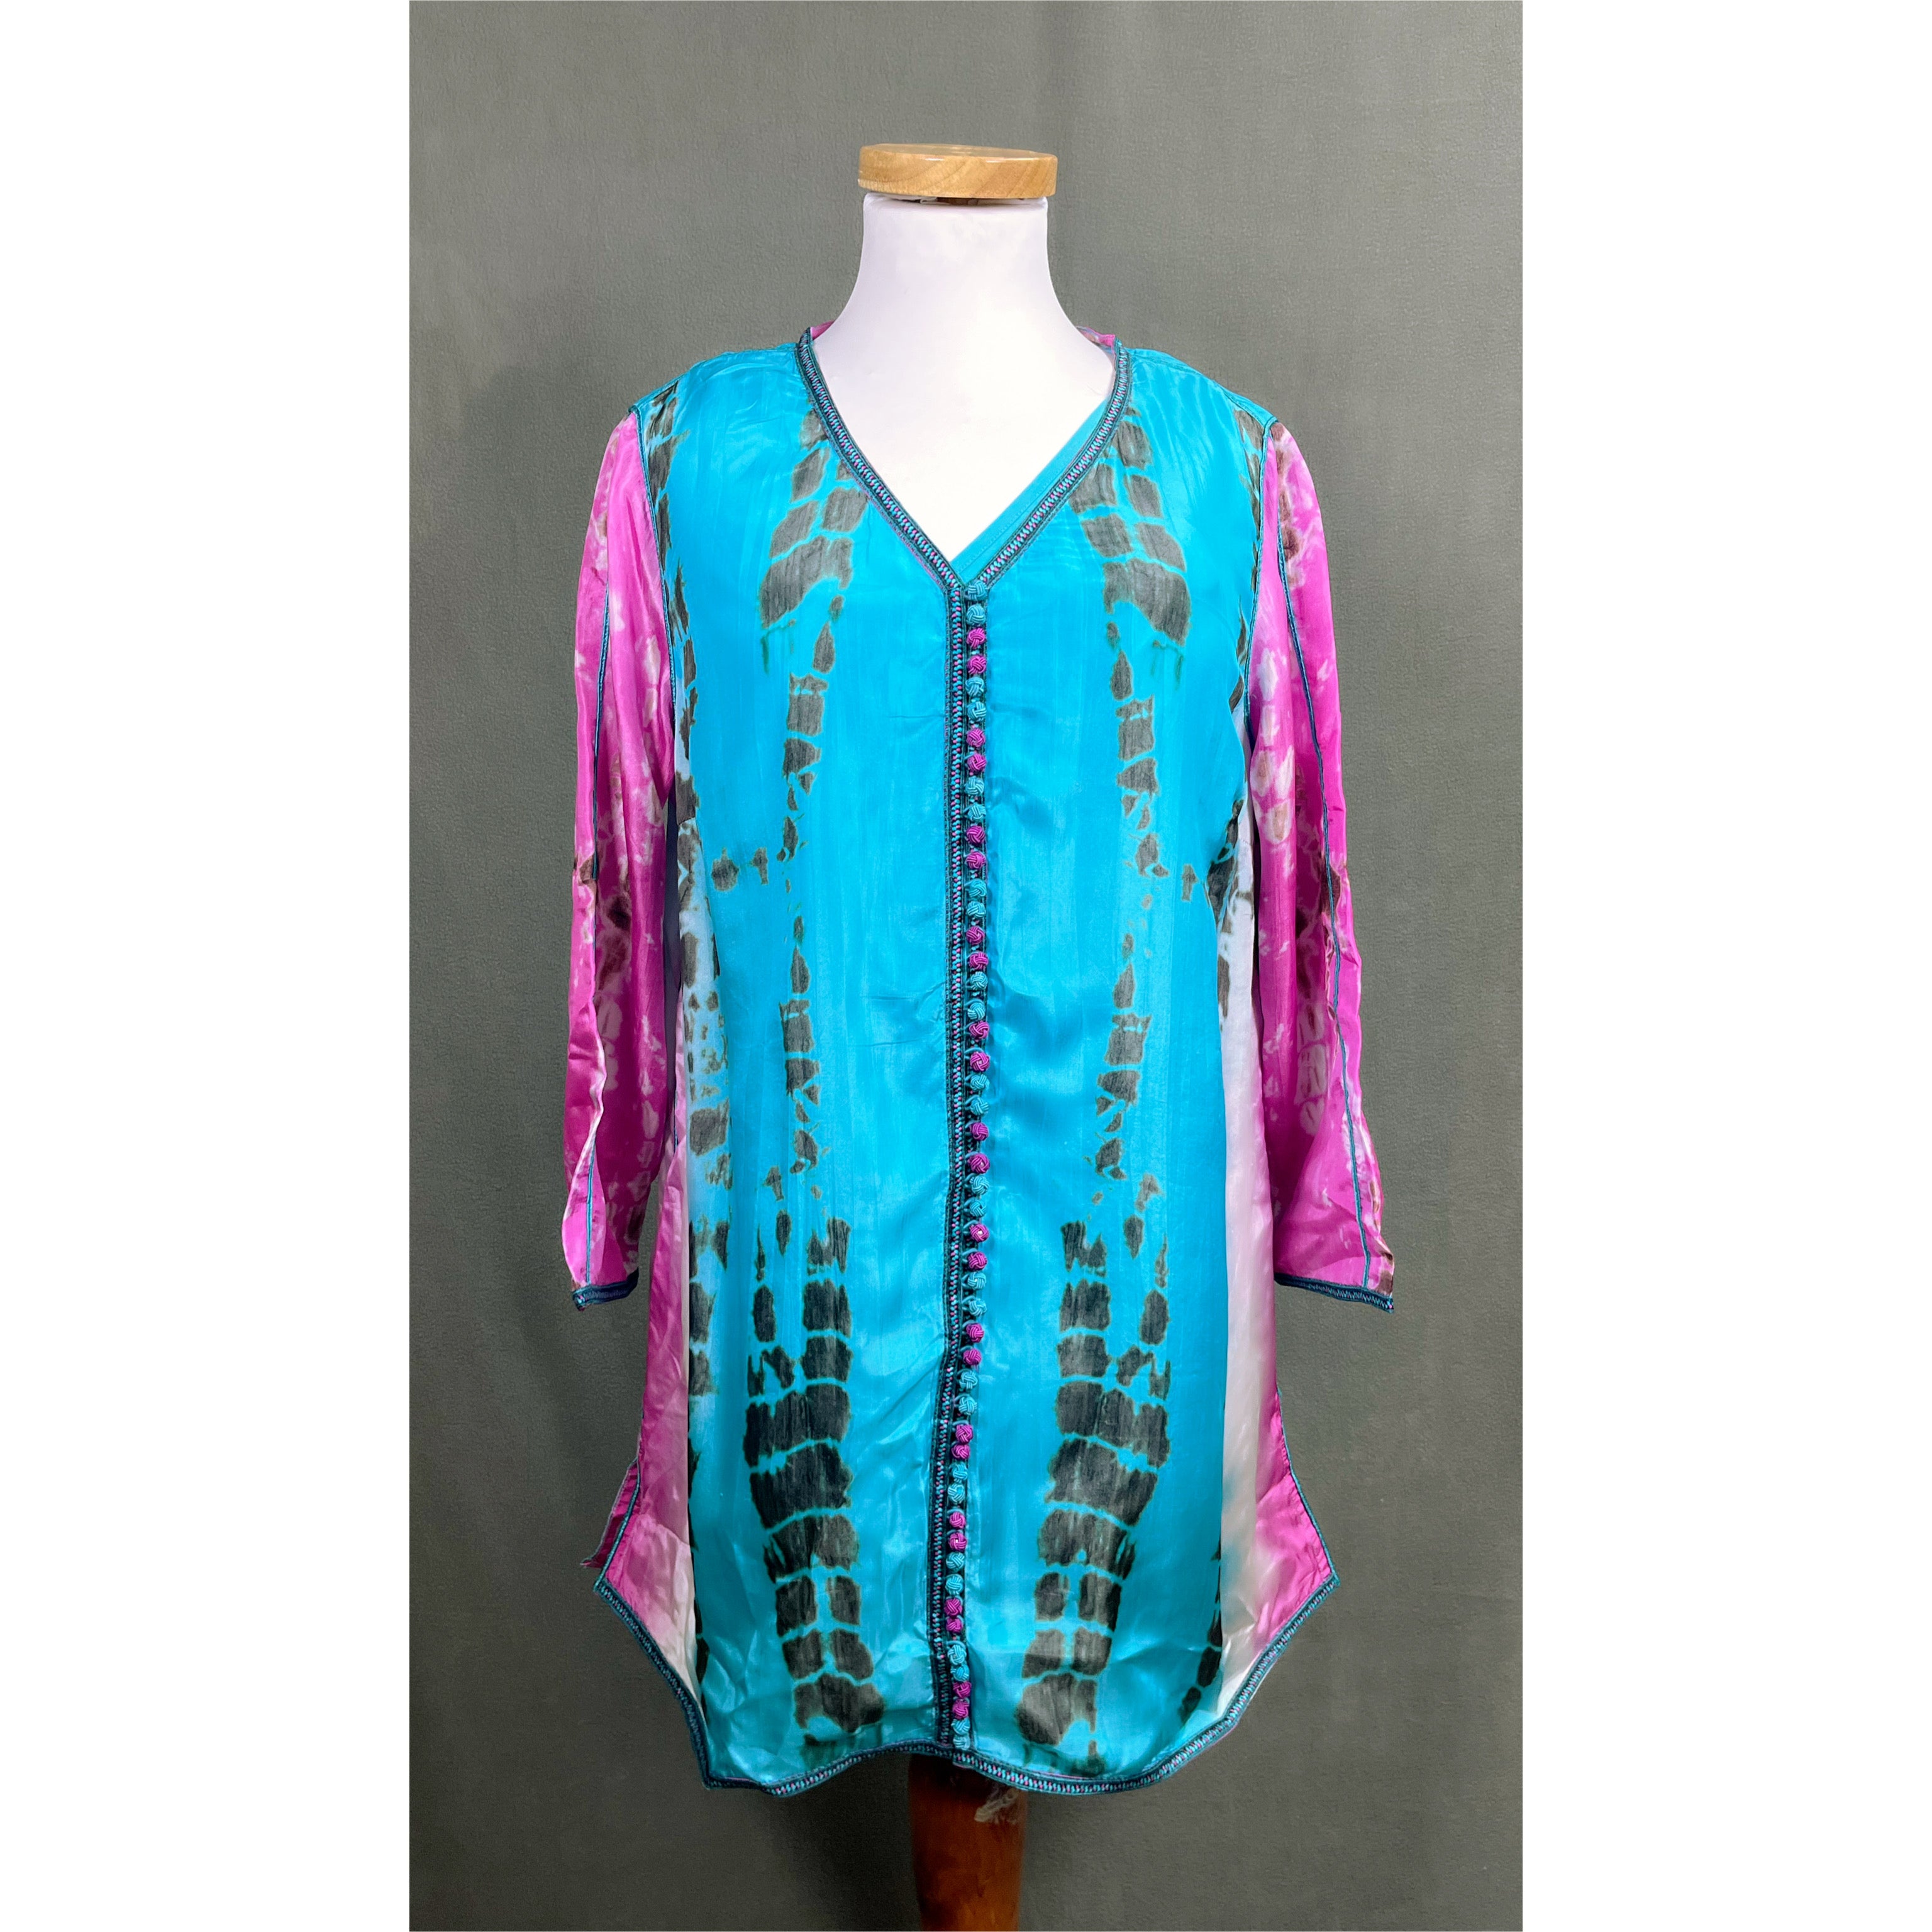 Soft Surroundings turquoise & magenta silk blouse, size M, NEW WITH TAGS!